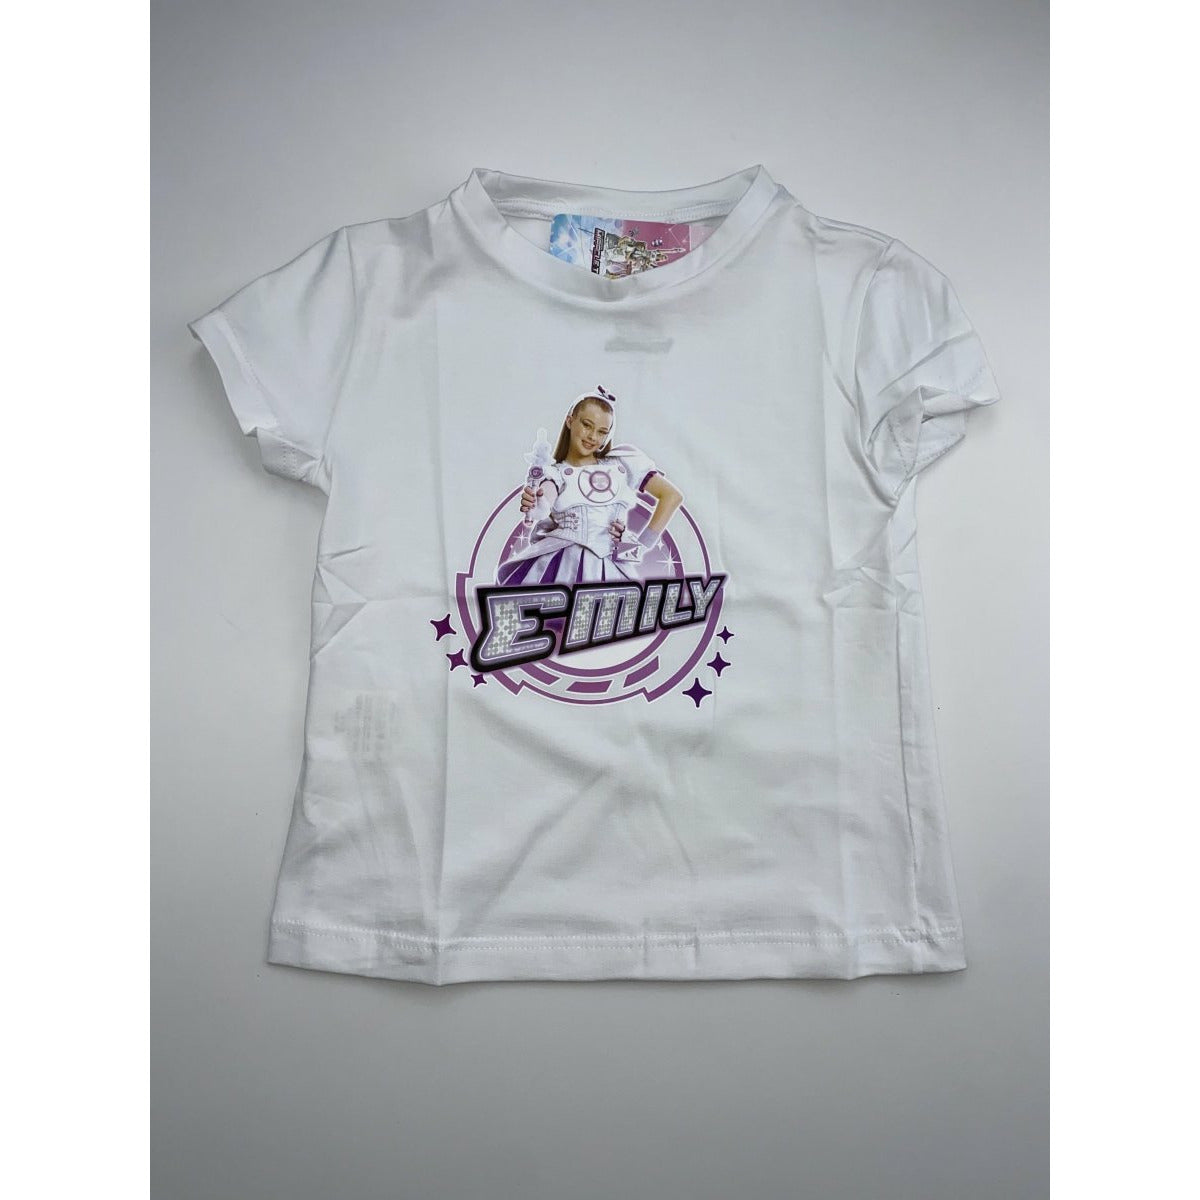 T-shirt Miracle tunes 3/10 anni - Mstore016